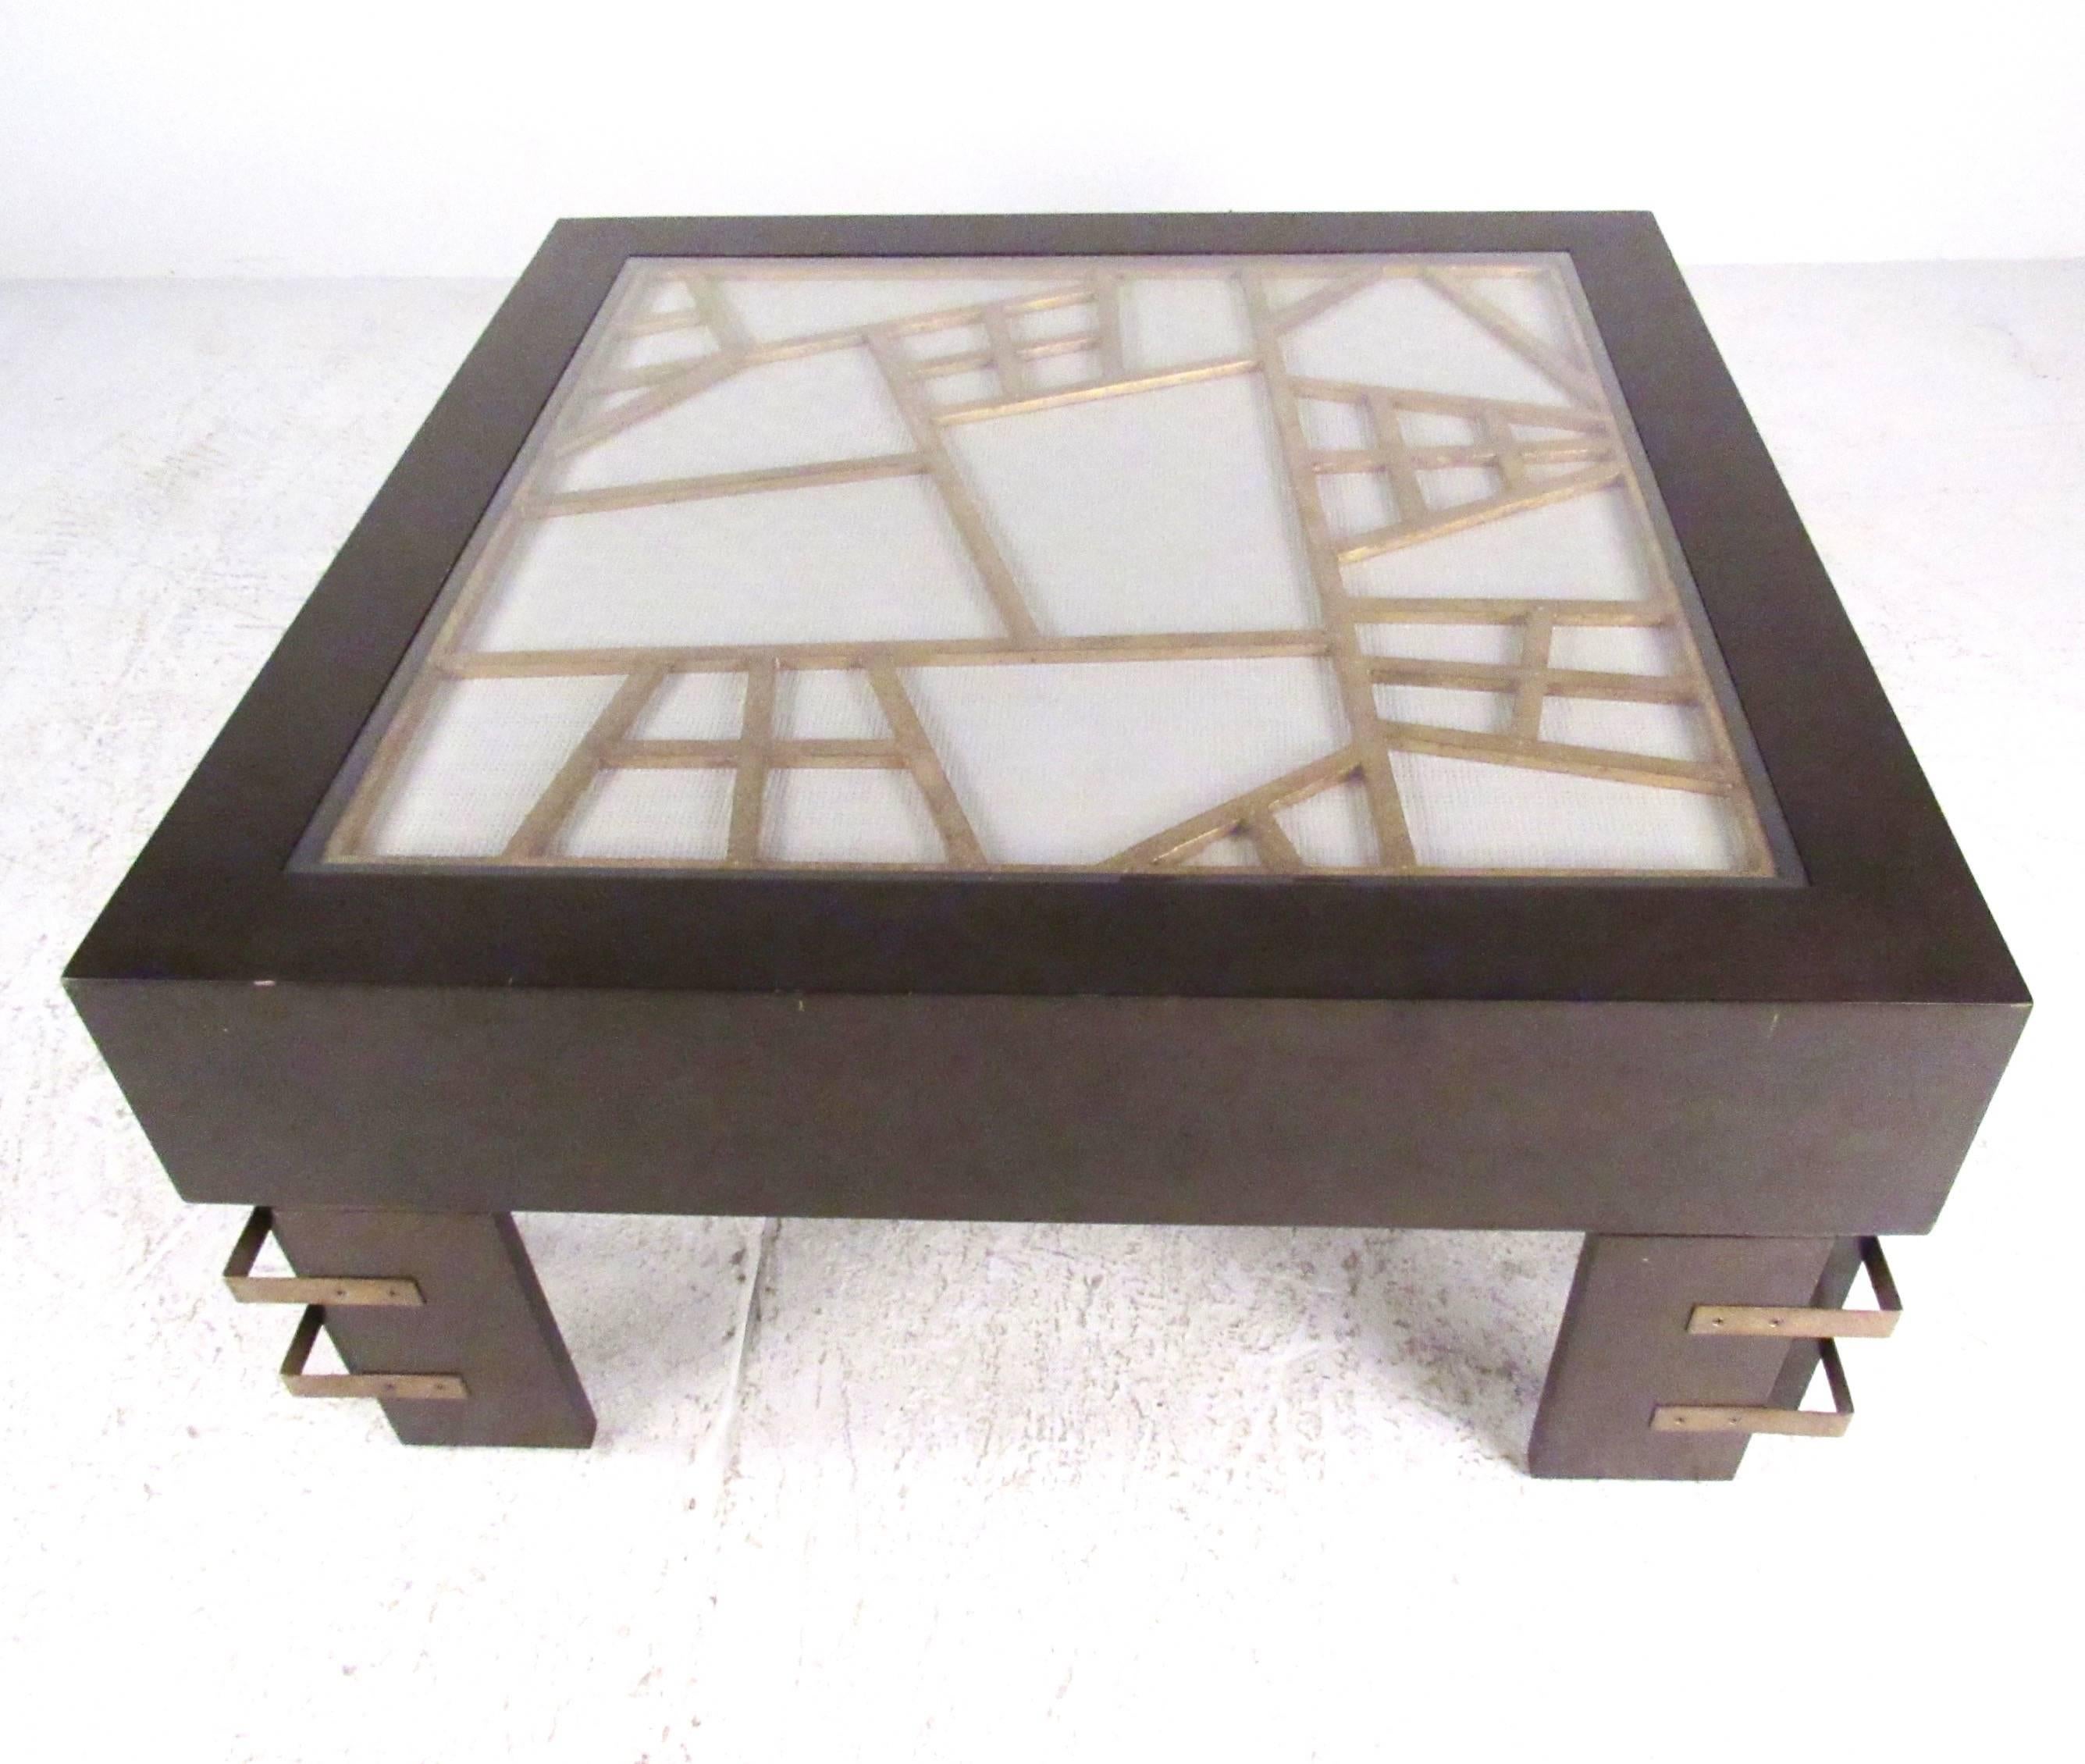 This stylish modern coffee table features sturdy construction with textured inlaid top beneath protective glass. Unique leg design and clean lines add to the impressive appeal of this cocktail table. Please confirm item location (NY or NJ).